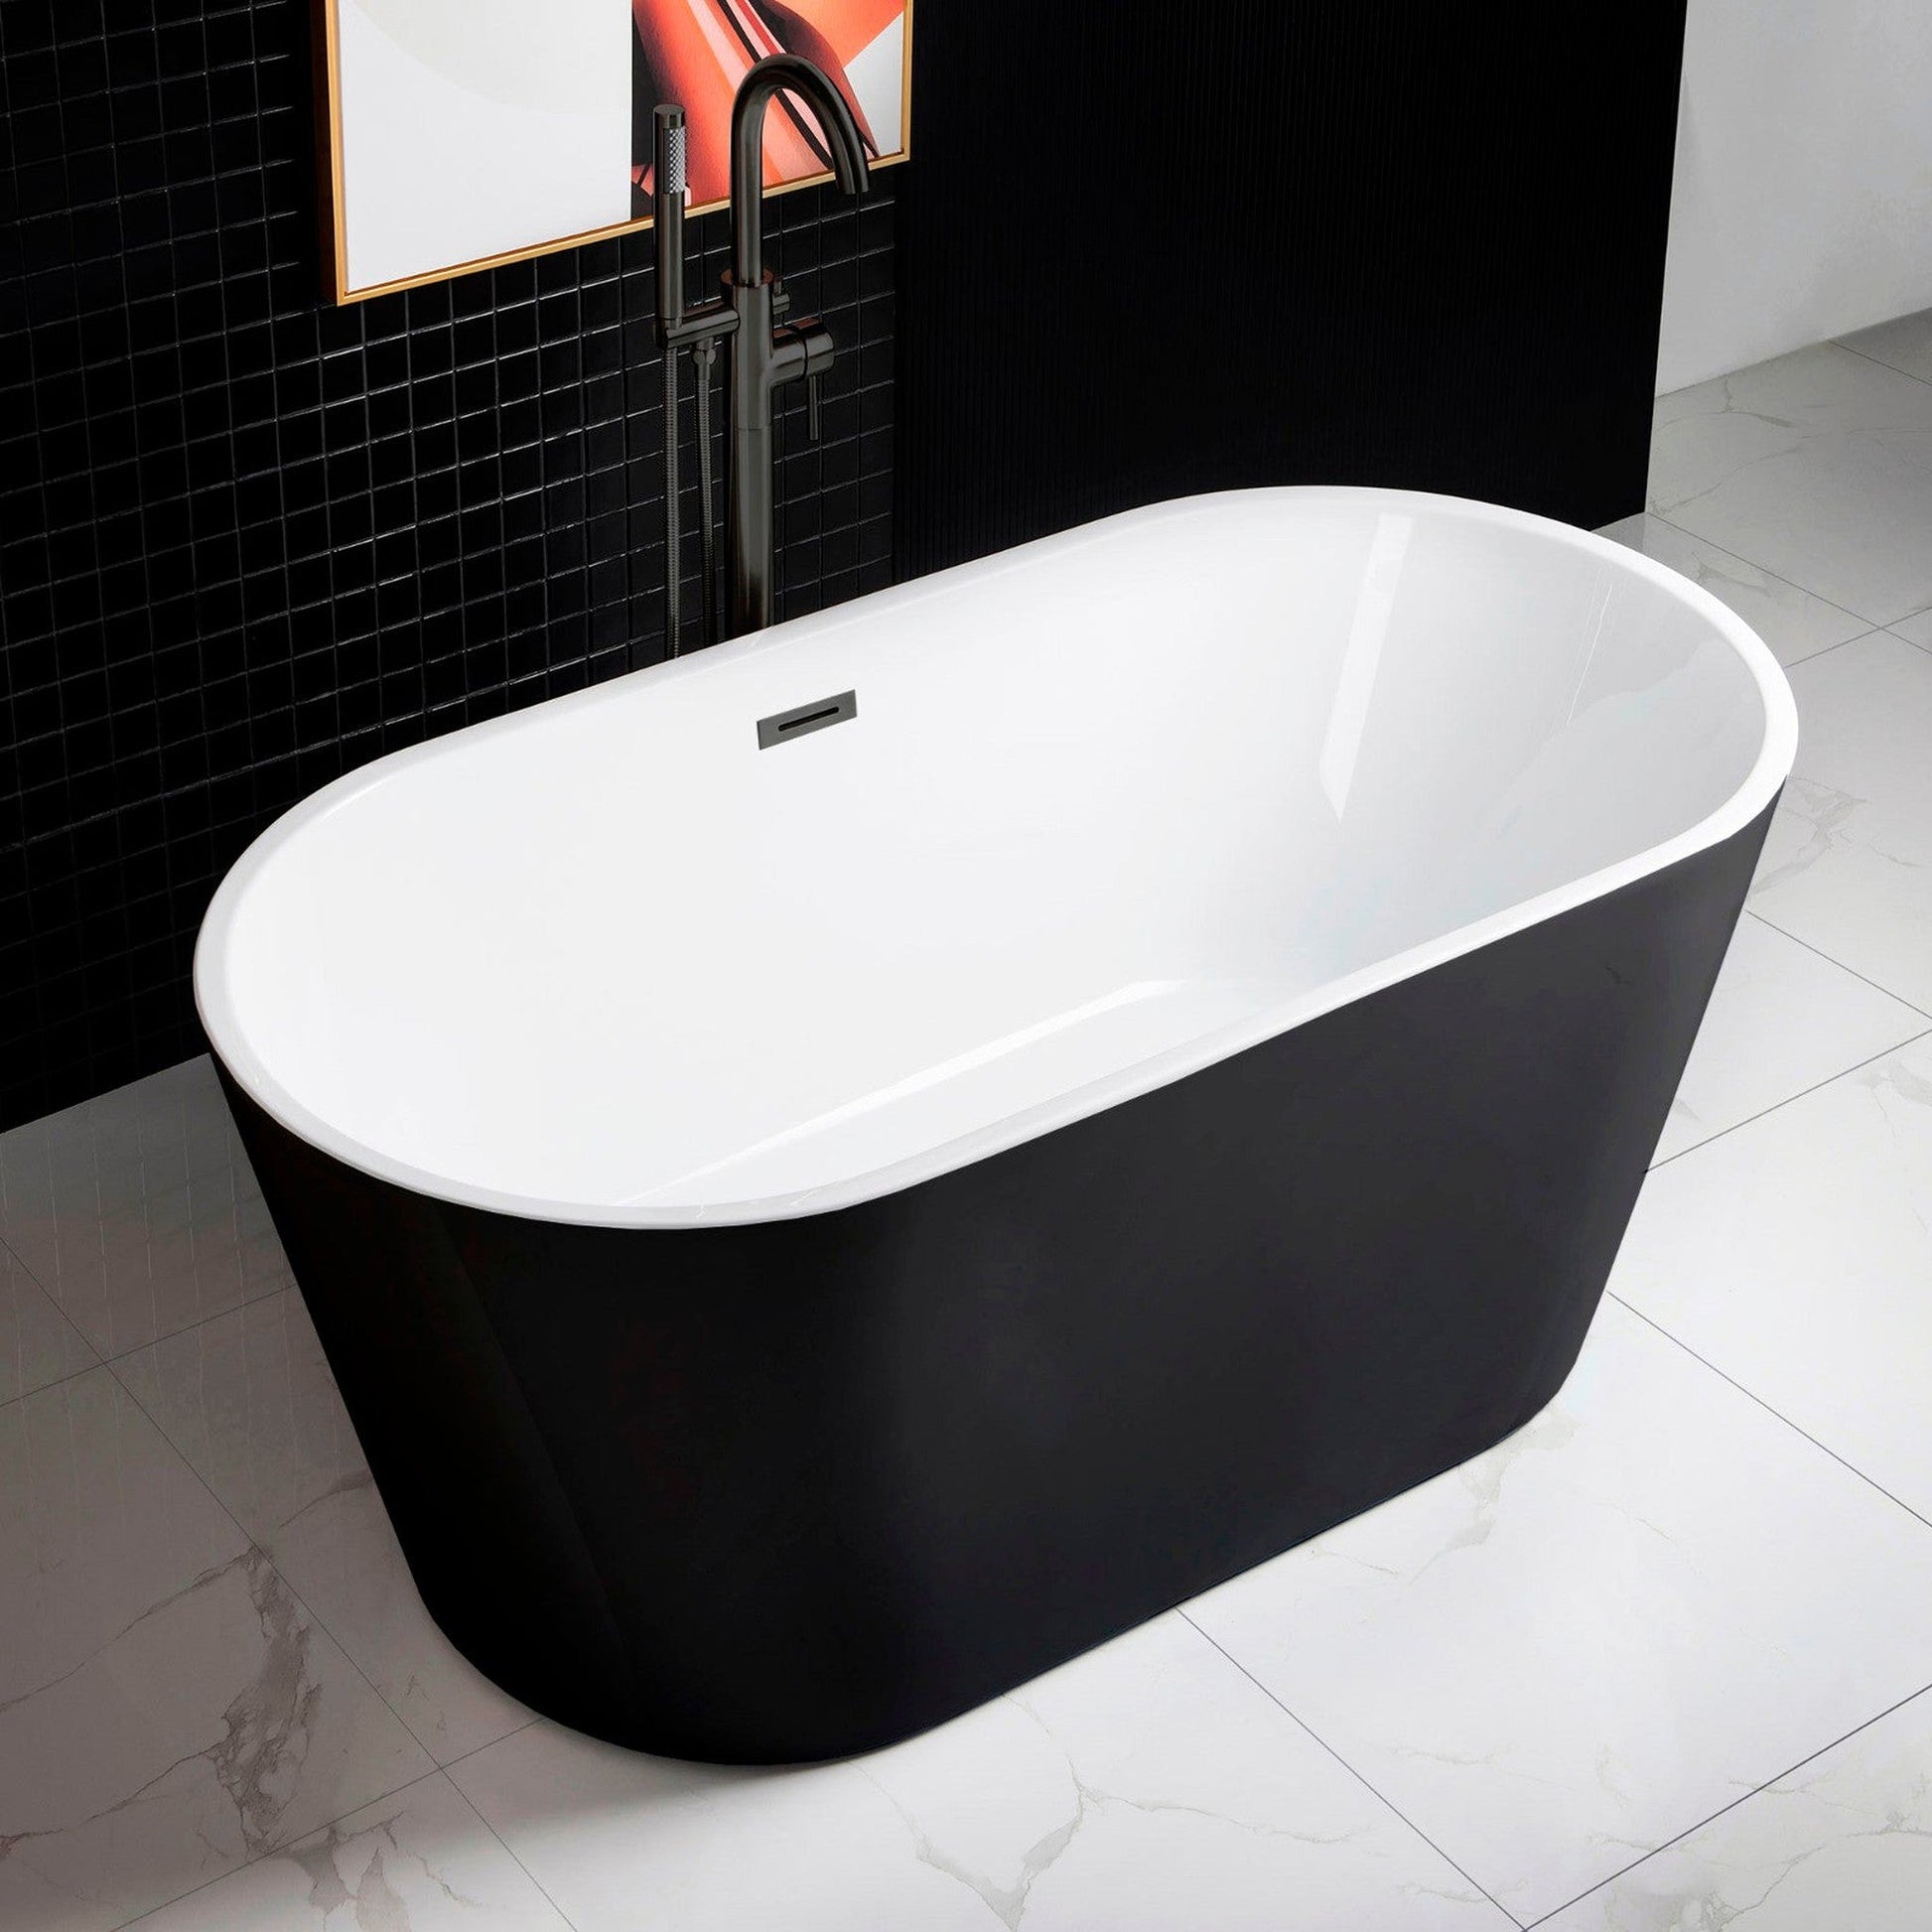 WoodBridge 59" Black Acrylic Freestanding Contemporary Soaking Bathtub With Matte Black Drain, Overflow, F0072MBSQ Tub Filler and Caddy Tray